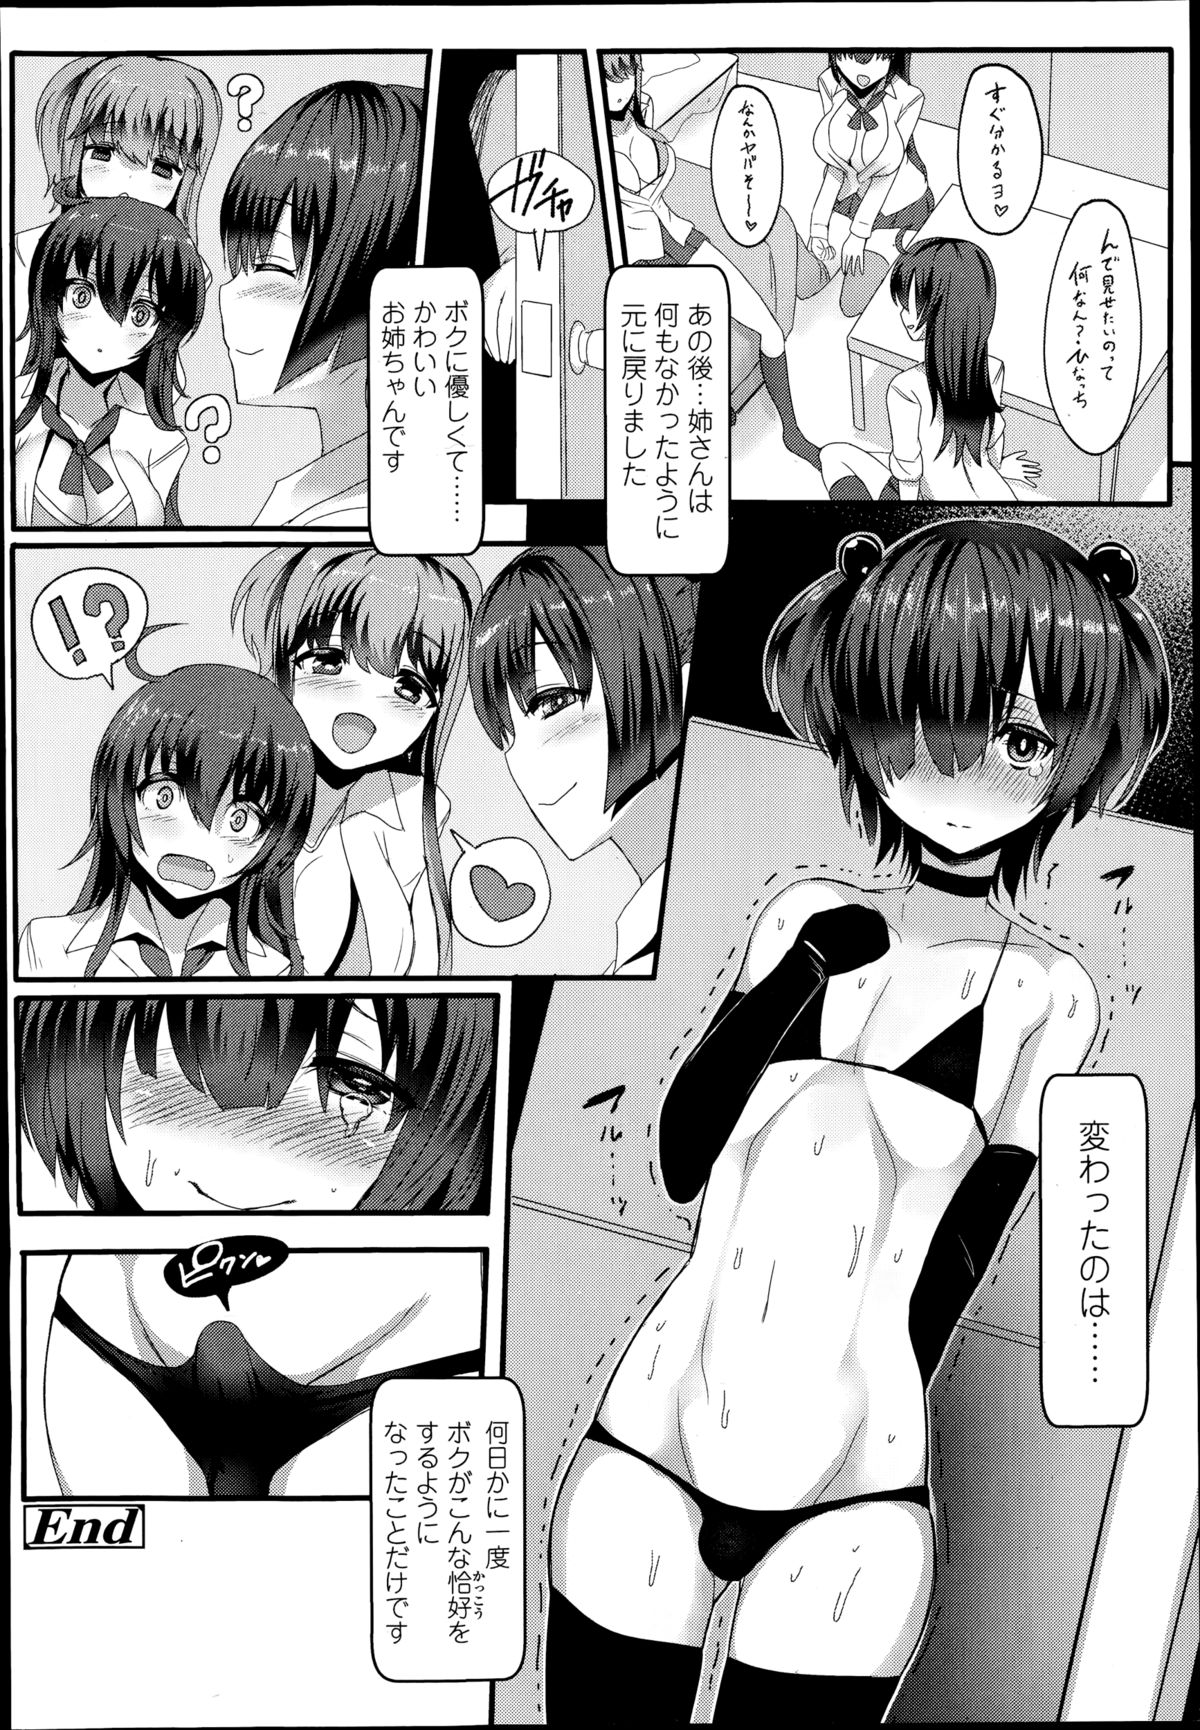 Girls forM Vol. 08 page 22 full